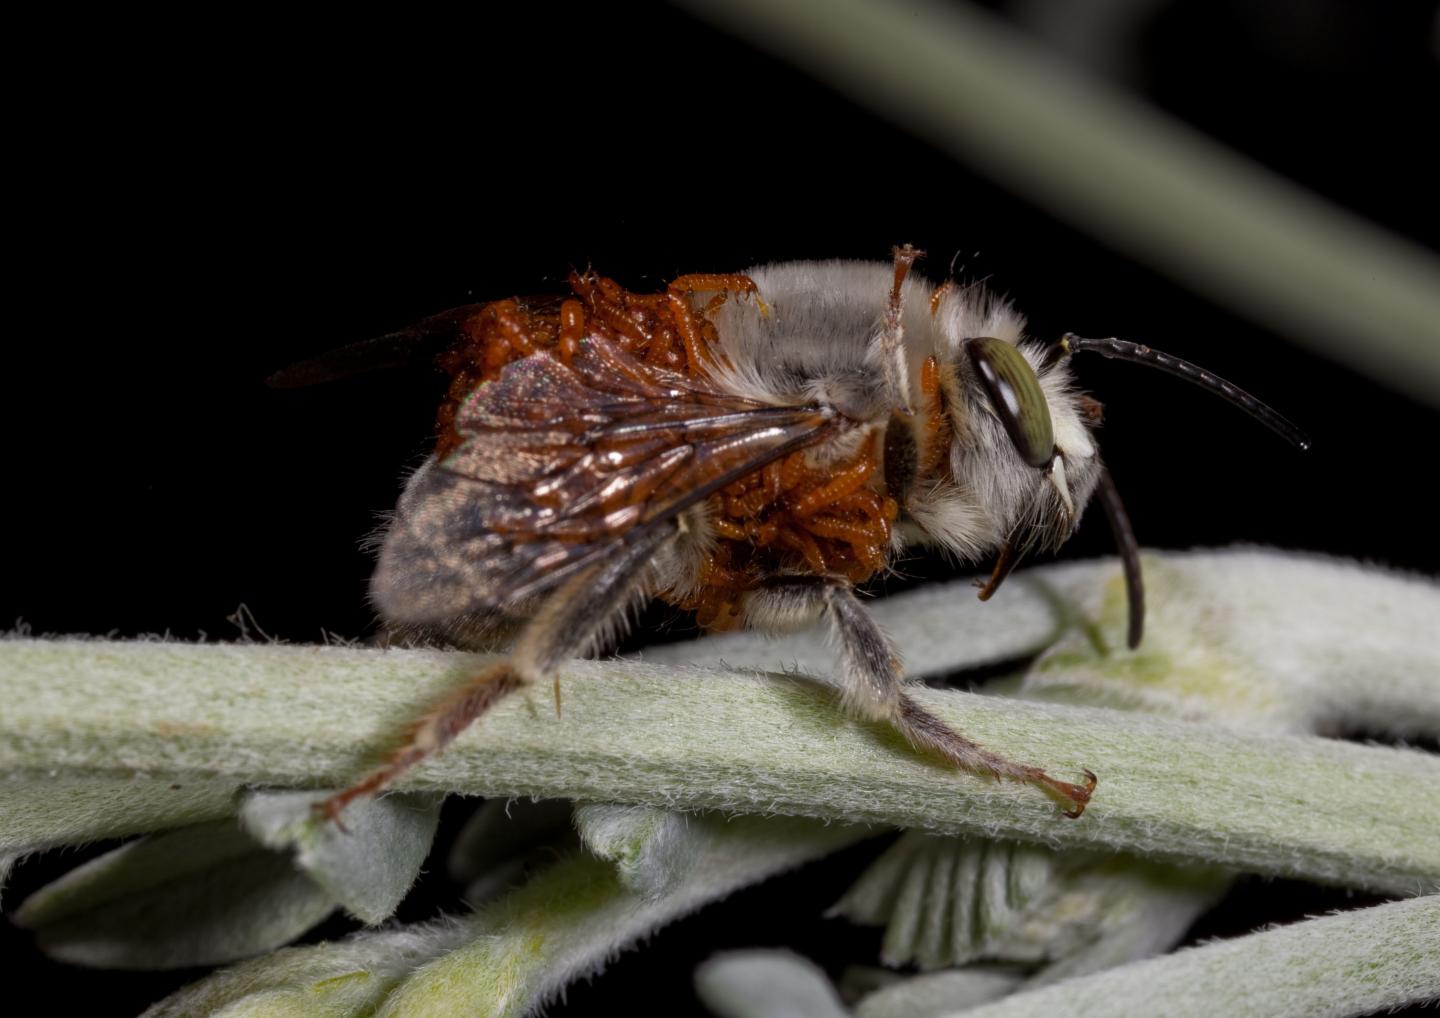 Beetle Adapts Chemical Mimicry To Parasitize Different Bee Species